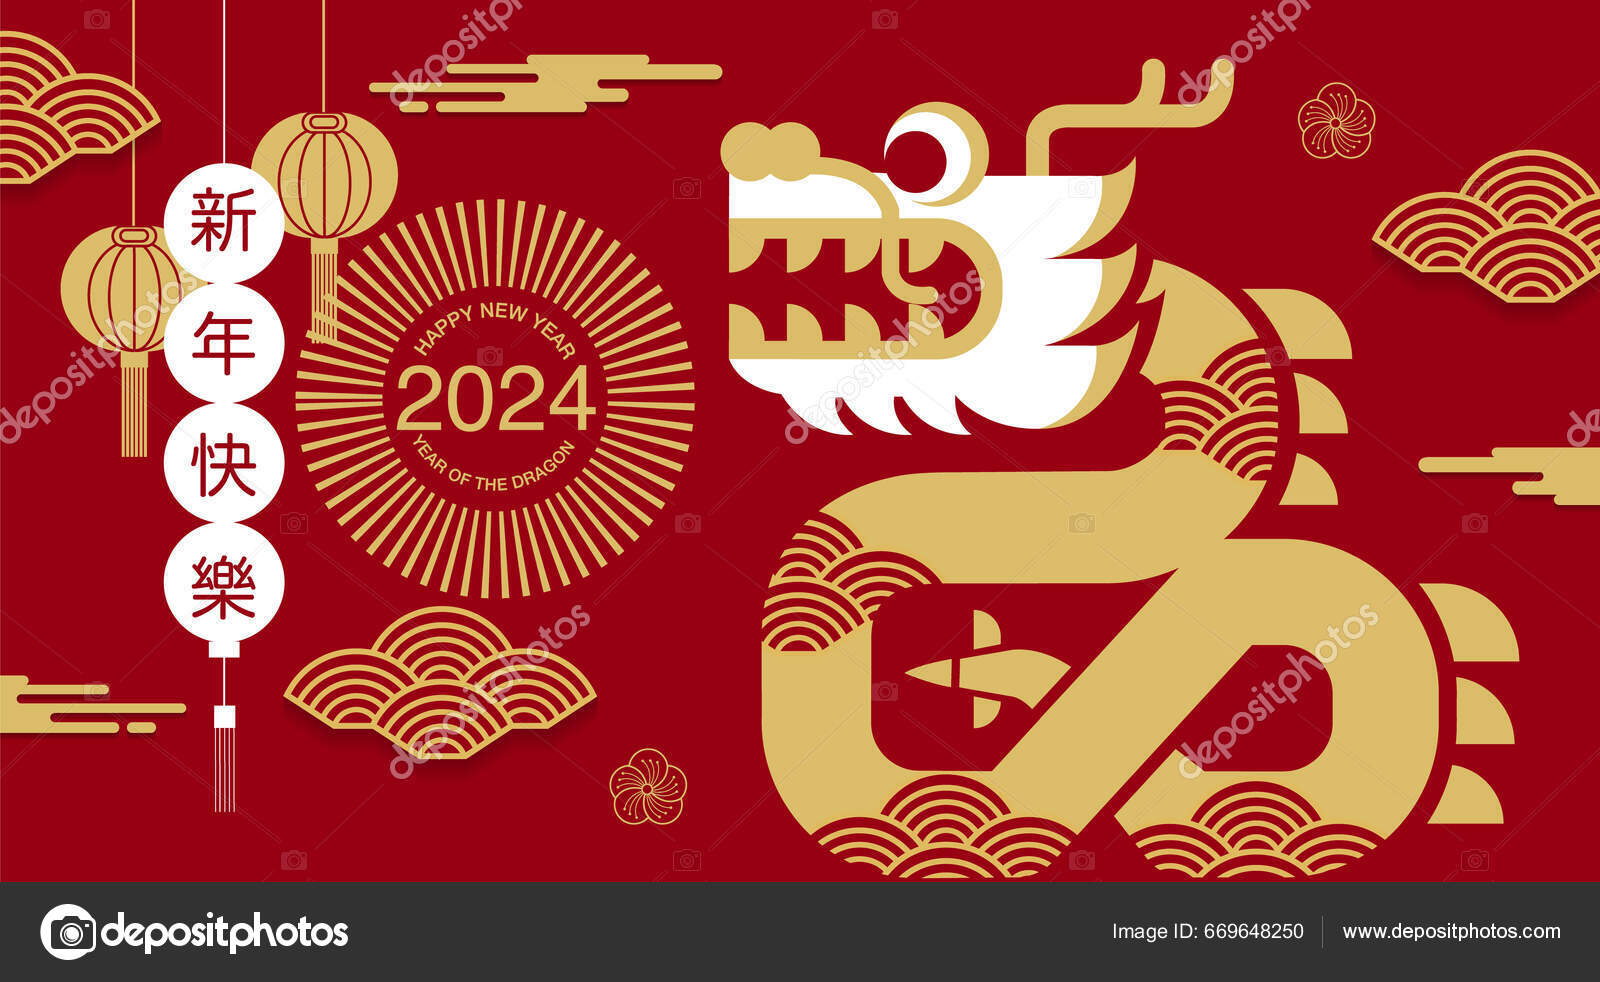 Big Dot Of Happiness Lunar New Year - Diy 2024 Year Of The Dragon